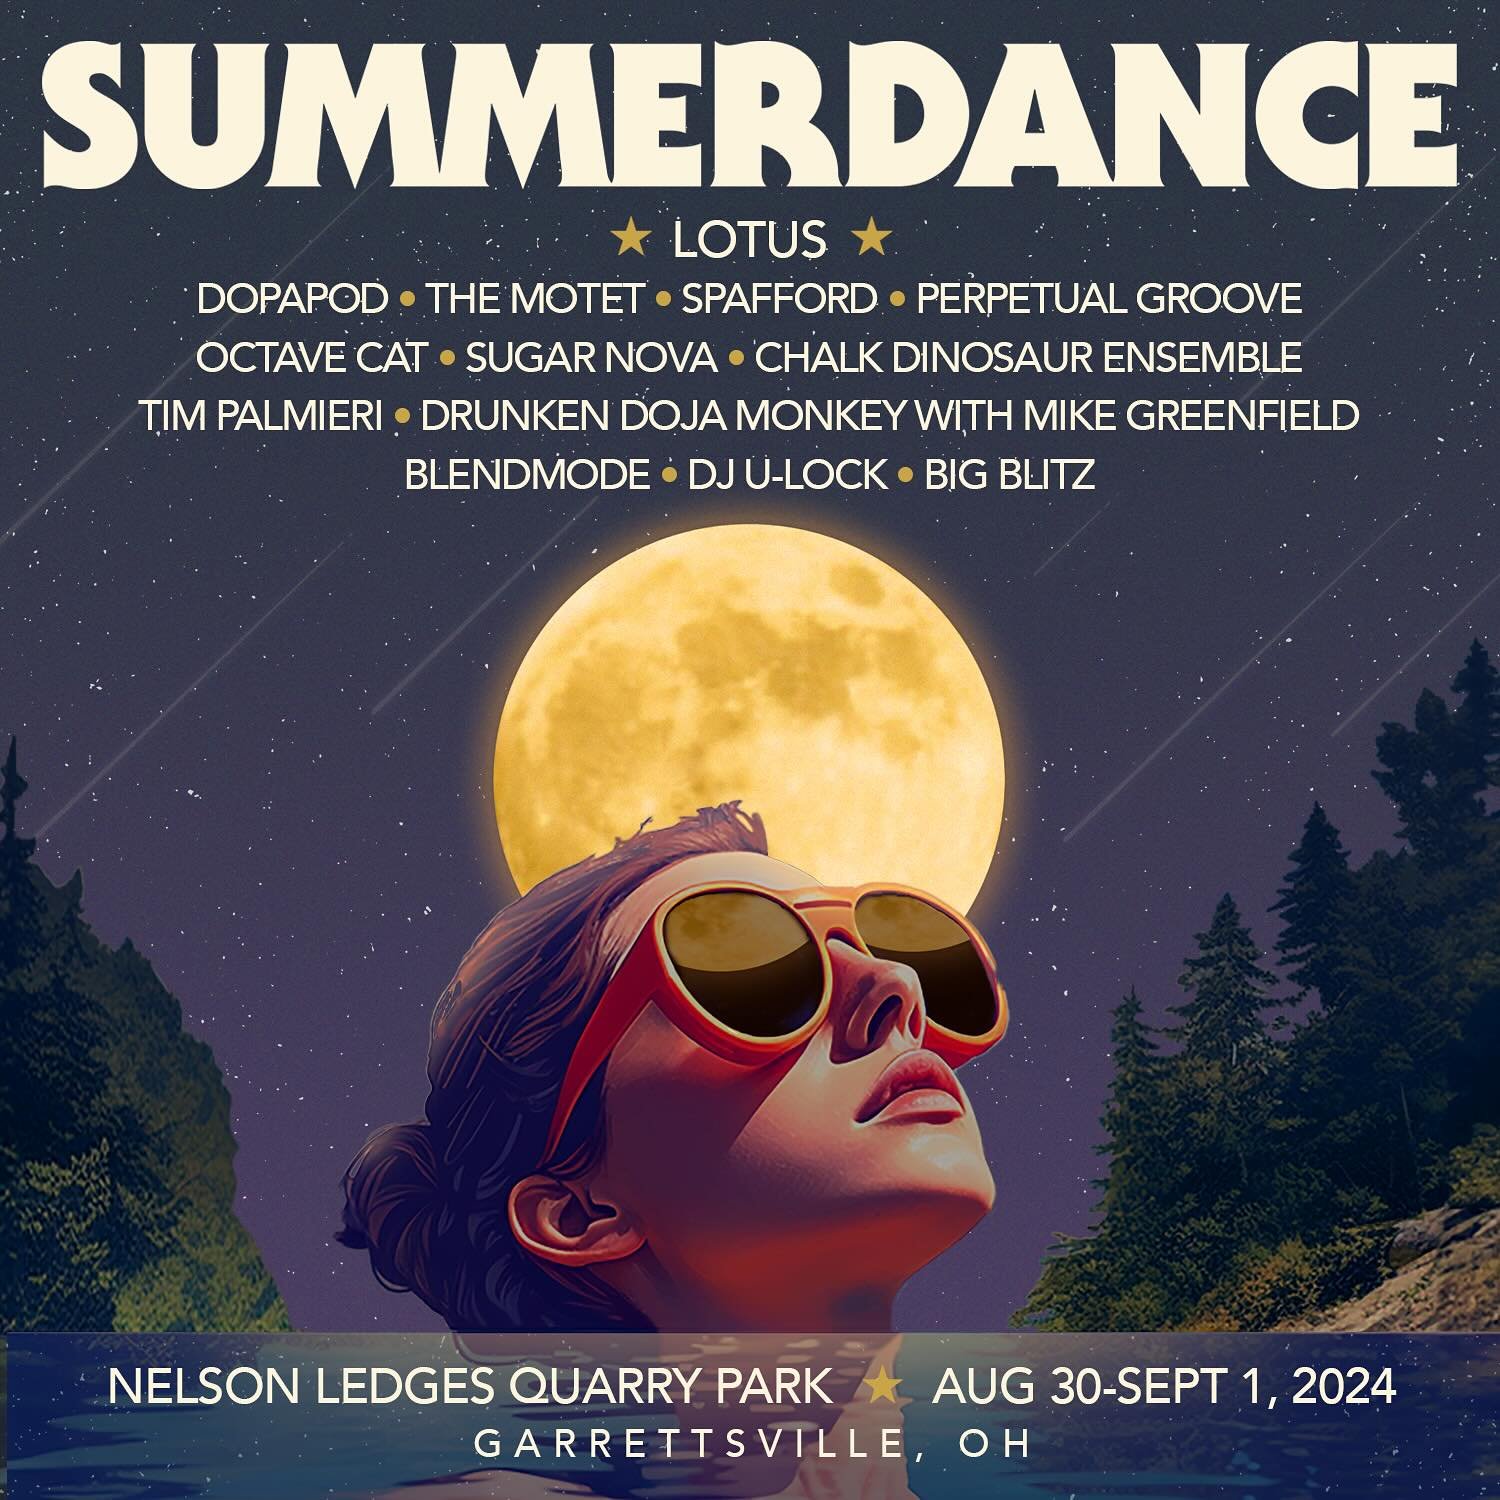 We&rsquo;re headed to the Quarry! Thanks so much to @lotusinstagram for inviting us to join this awesome lineup for the annual Summerdance Festival over Labor Day weekend. 🎟&rsquo;s available now!